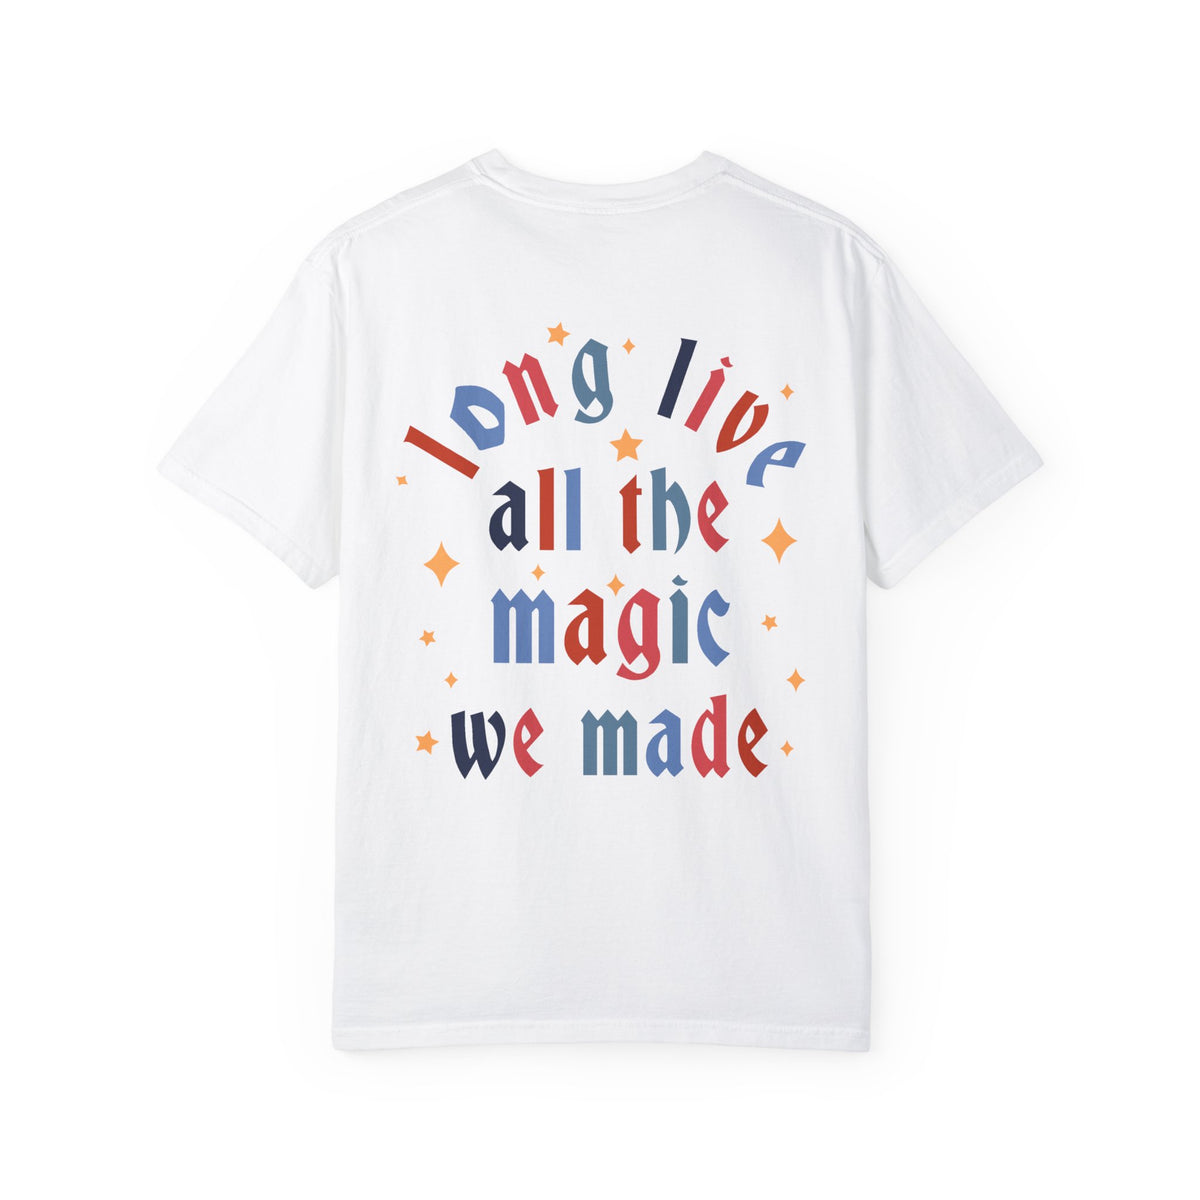 Long Live All The Magic We Made Patriotic Comfort Colors Unisex Garment-Dyed T-shirt